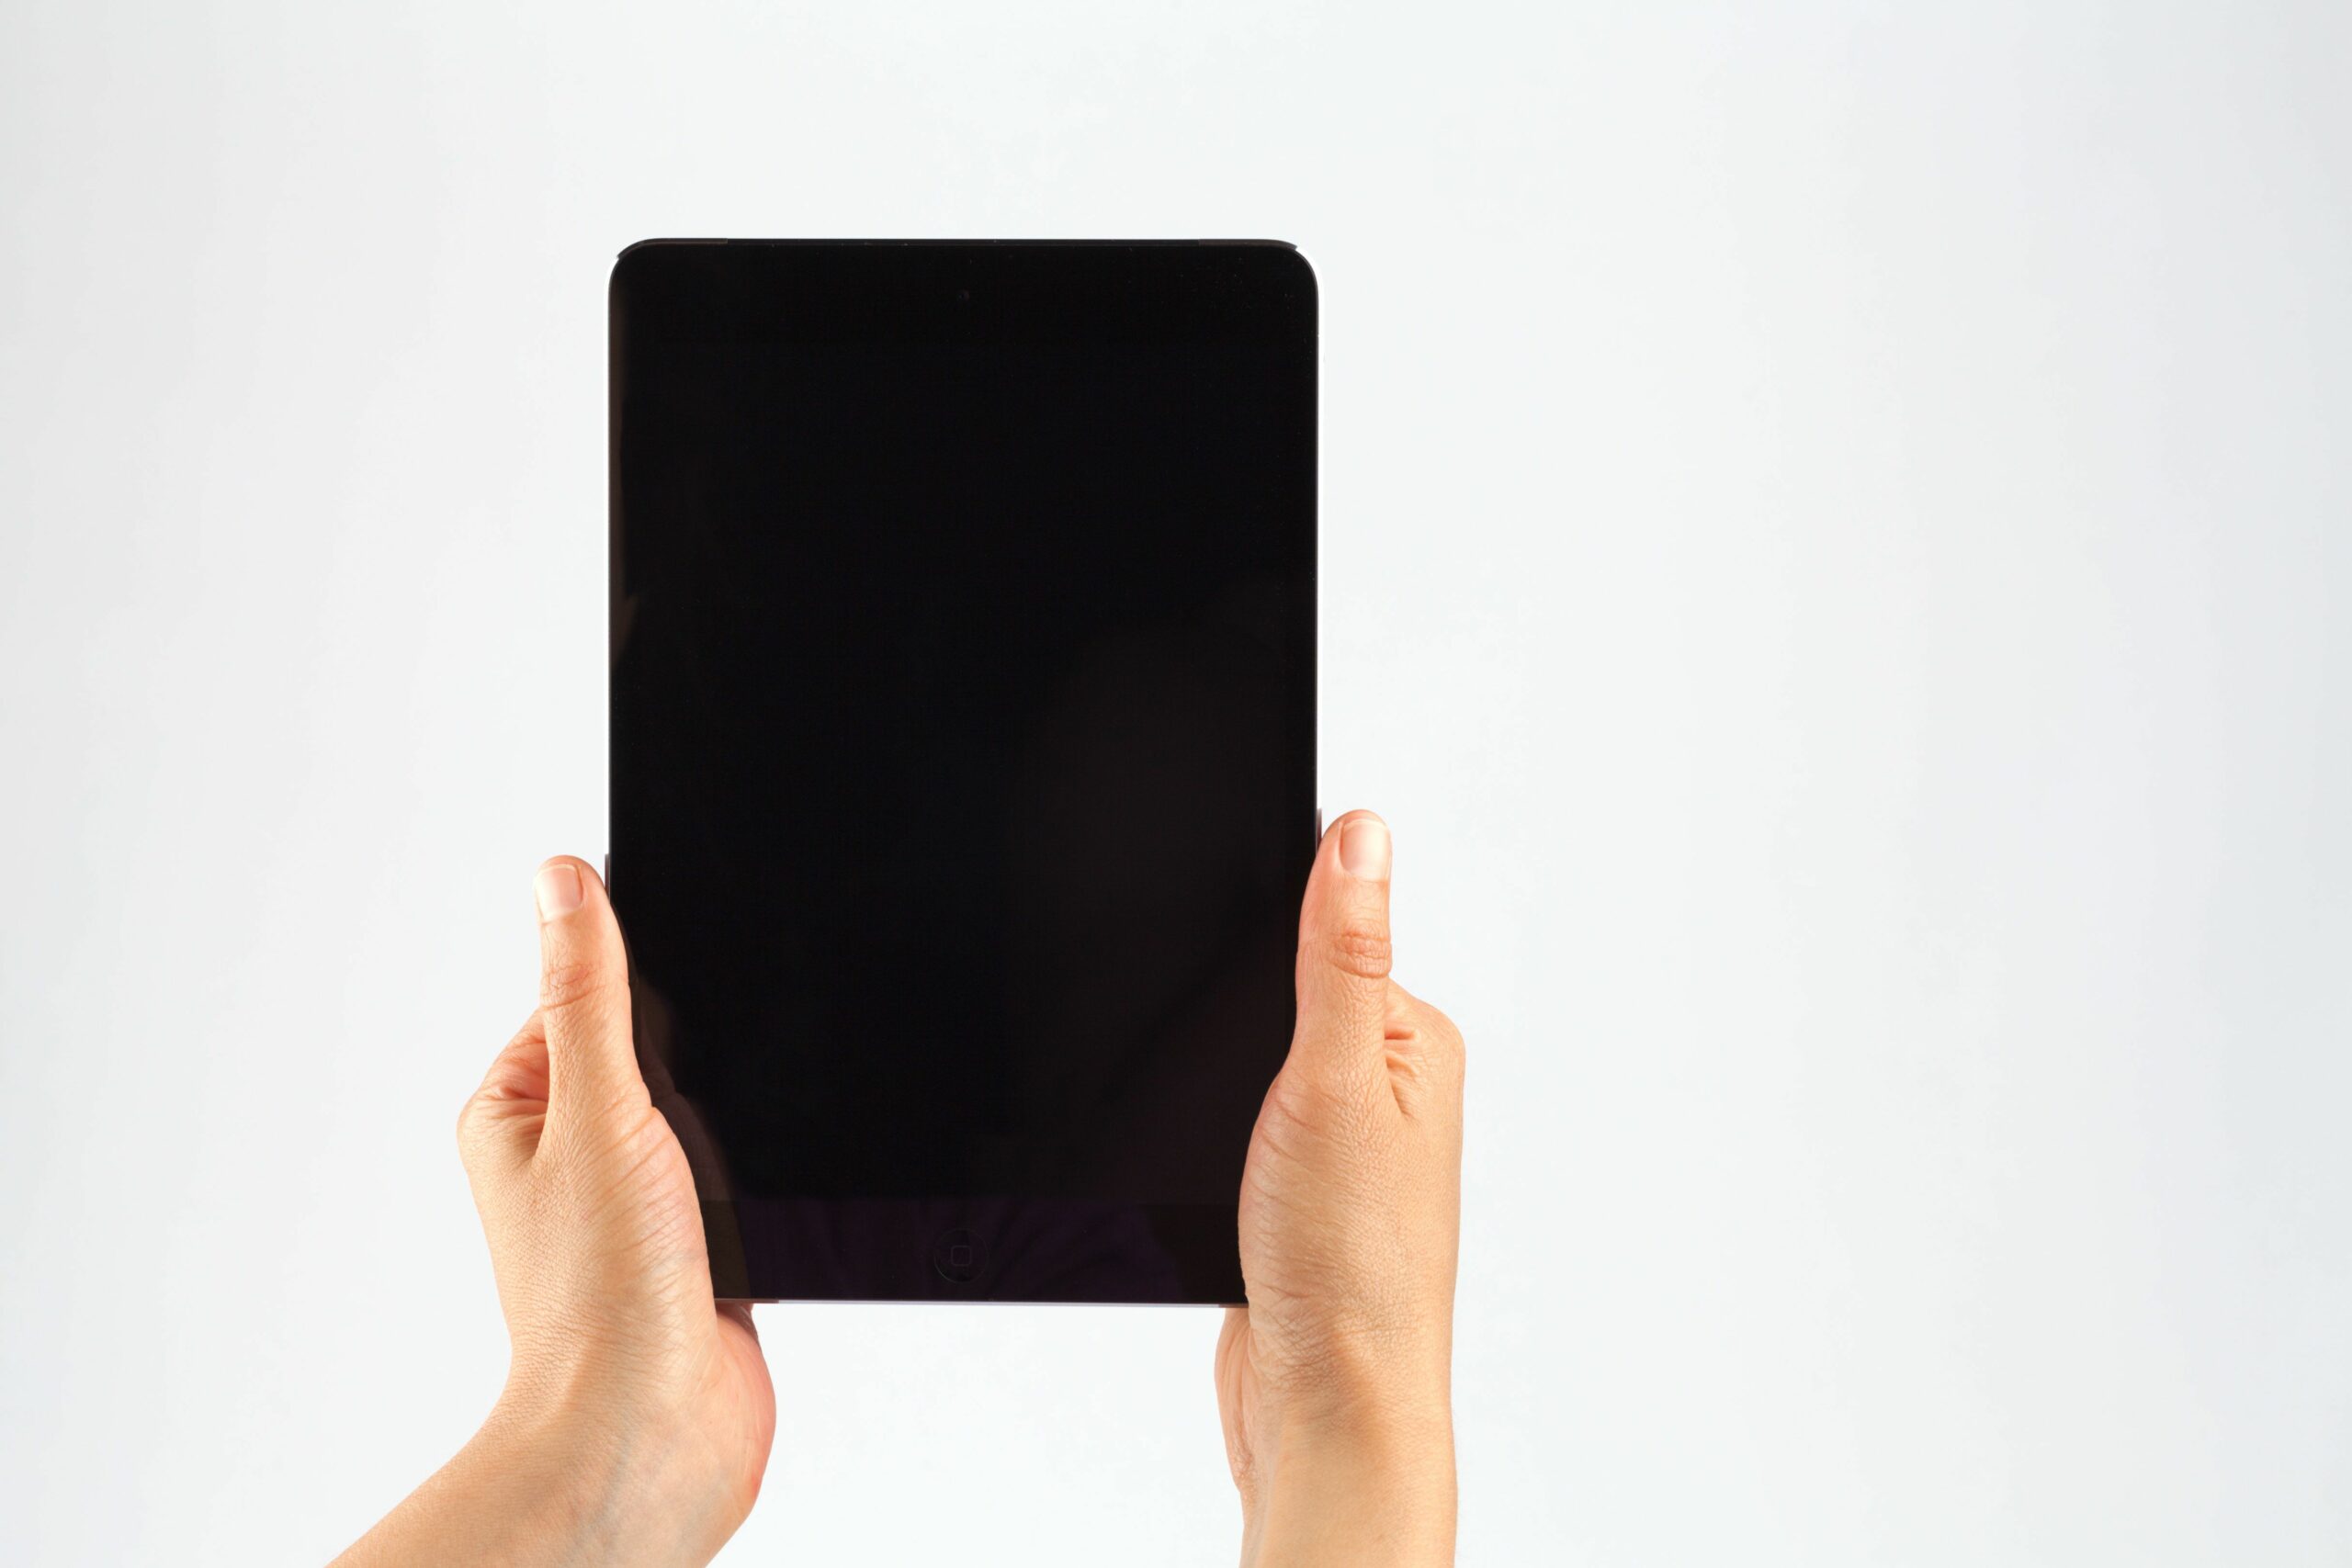 cropped hands of person holding digital tablet against white background 903957418 5b898708c9e77c007b5ecdce scaled